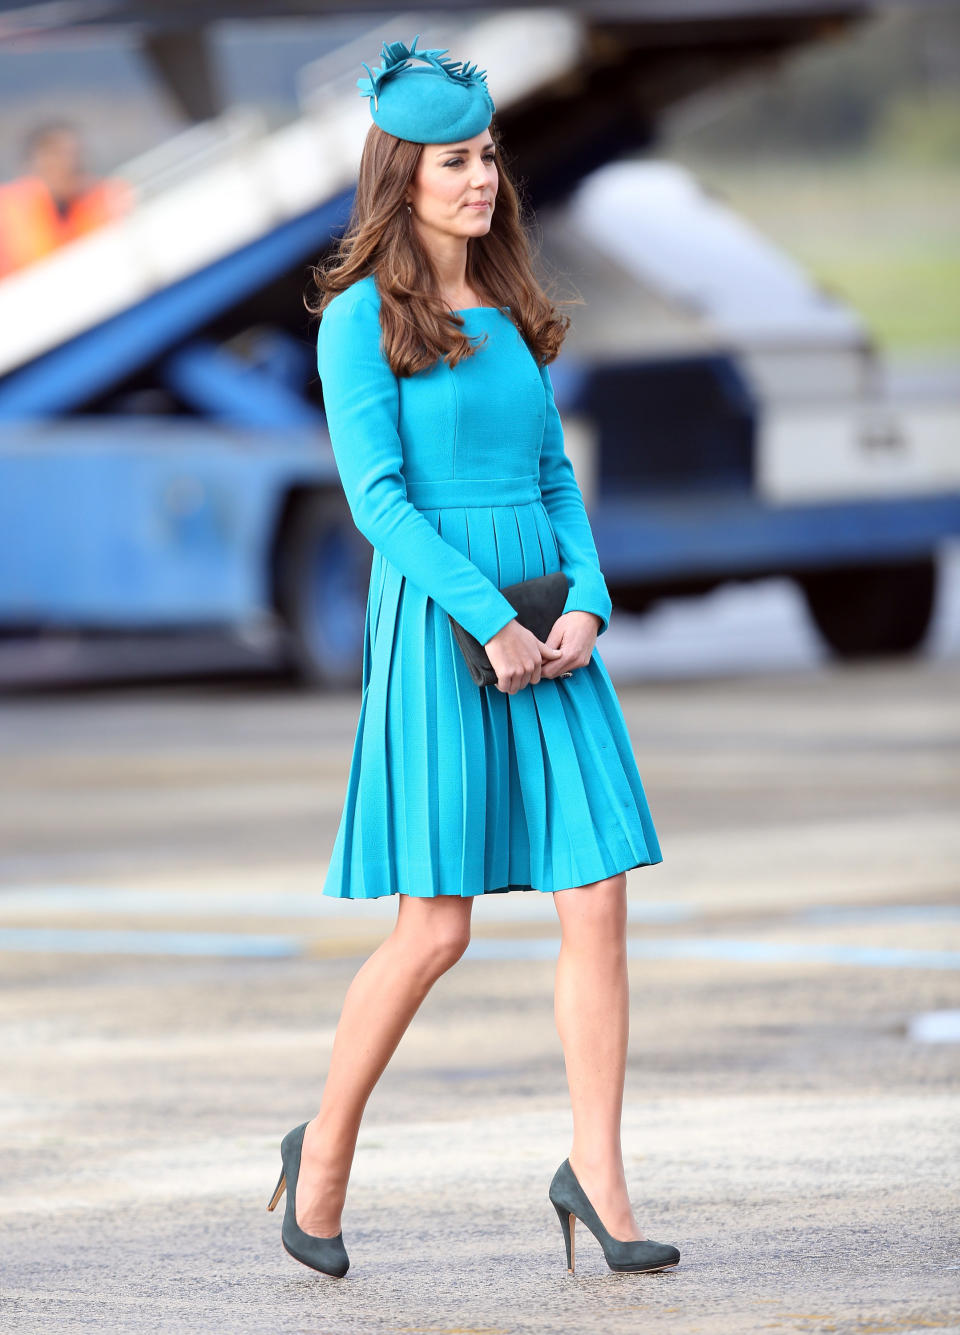 Kate was a standout in a pleated Emilia Wickstead dress as she arrived in Dunedin, New Zealand on April 13, 2014.